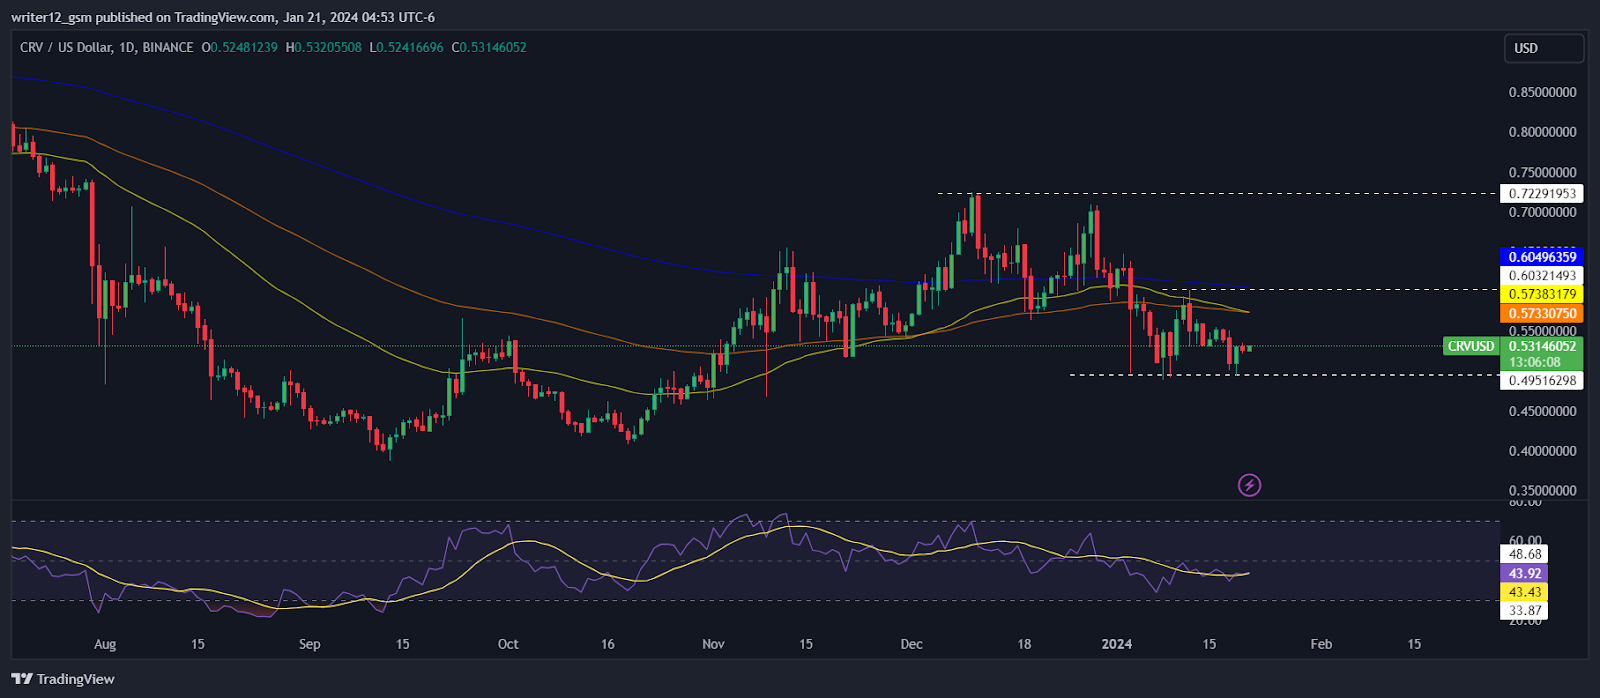 Curve DAO Token Price Prediction: What’s Next on the CRV Chart?